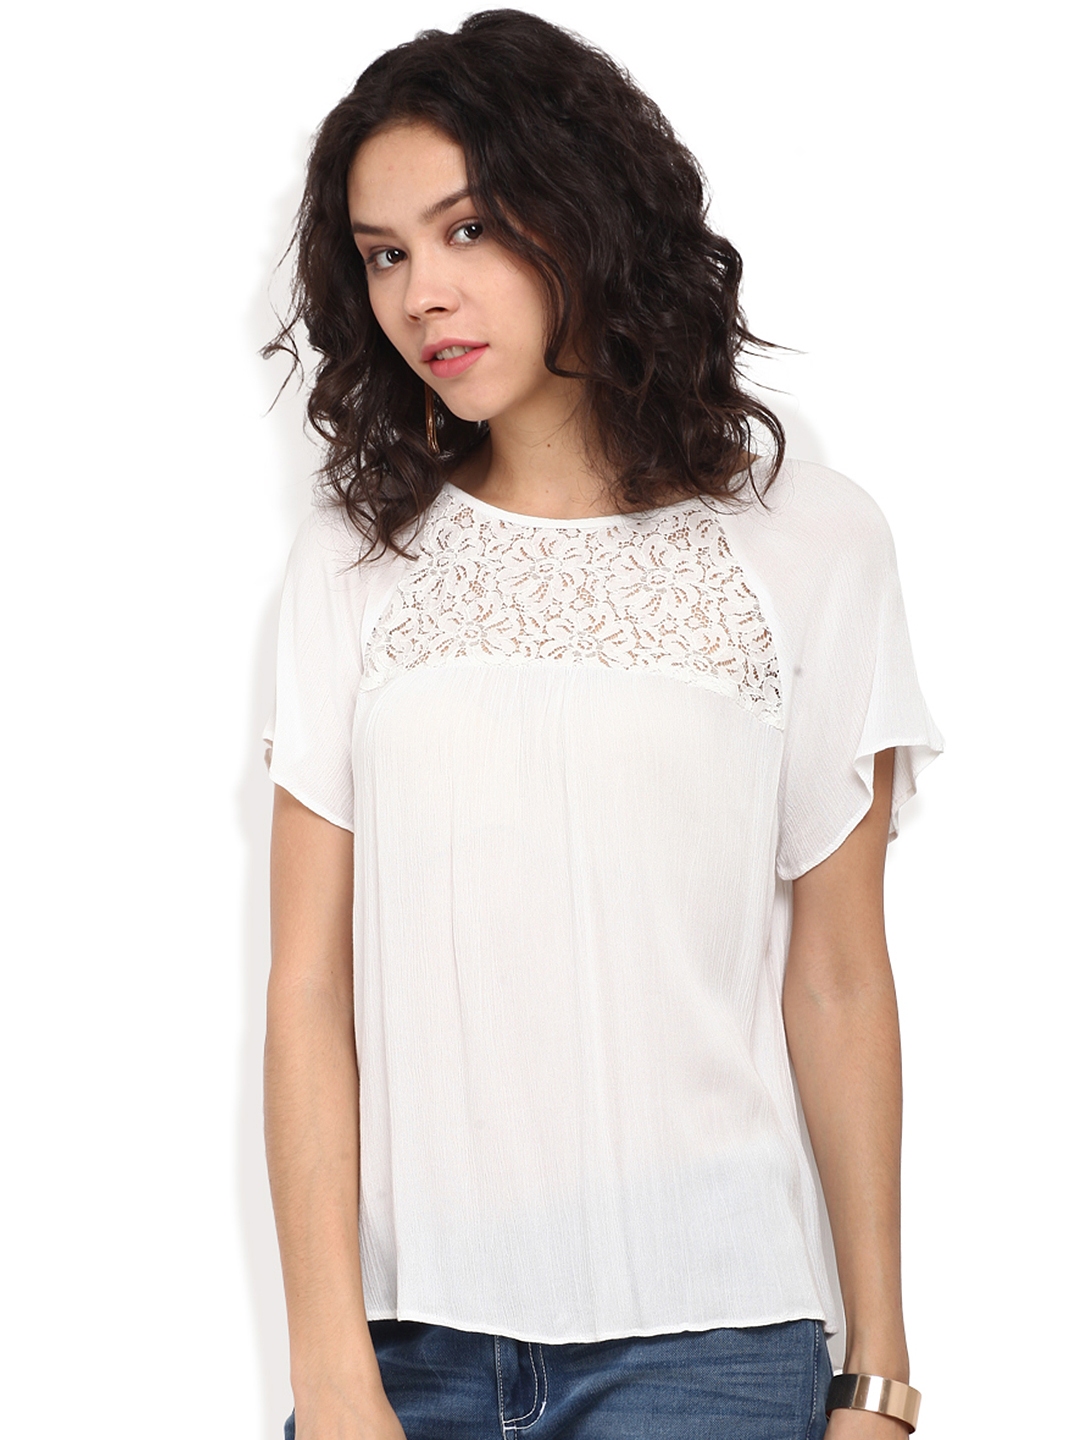 Buy Blue Sequin Women Off White Lace Boxy Top - Tops for Women 1537109 ...